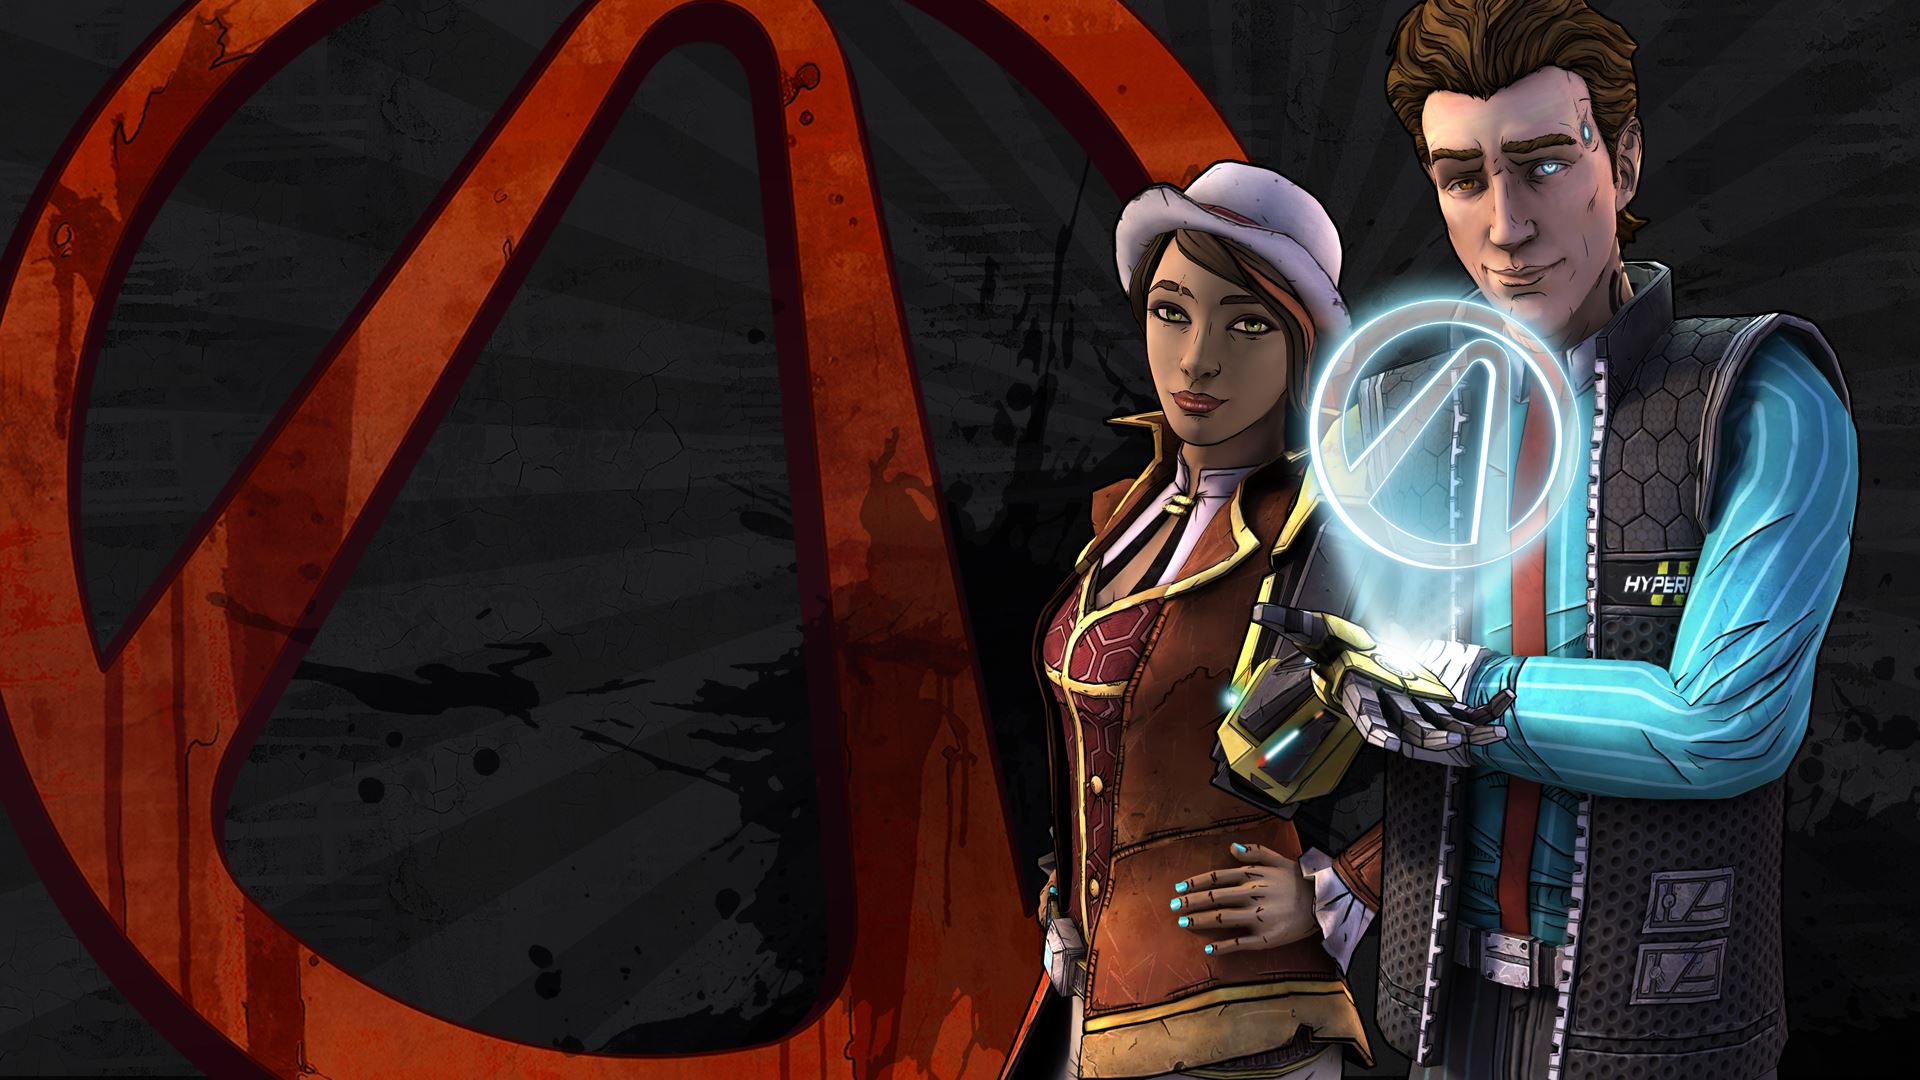 tales from the borderlands wallpaper,action adventure game,adventure game,pc game,games,cg artwork